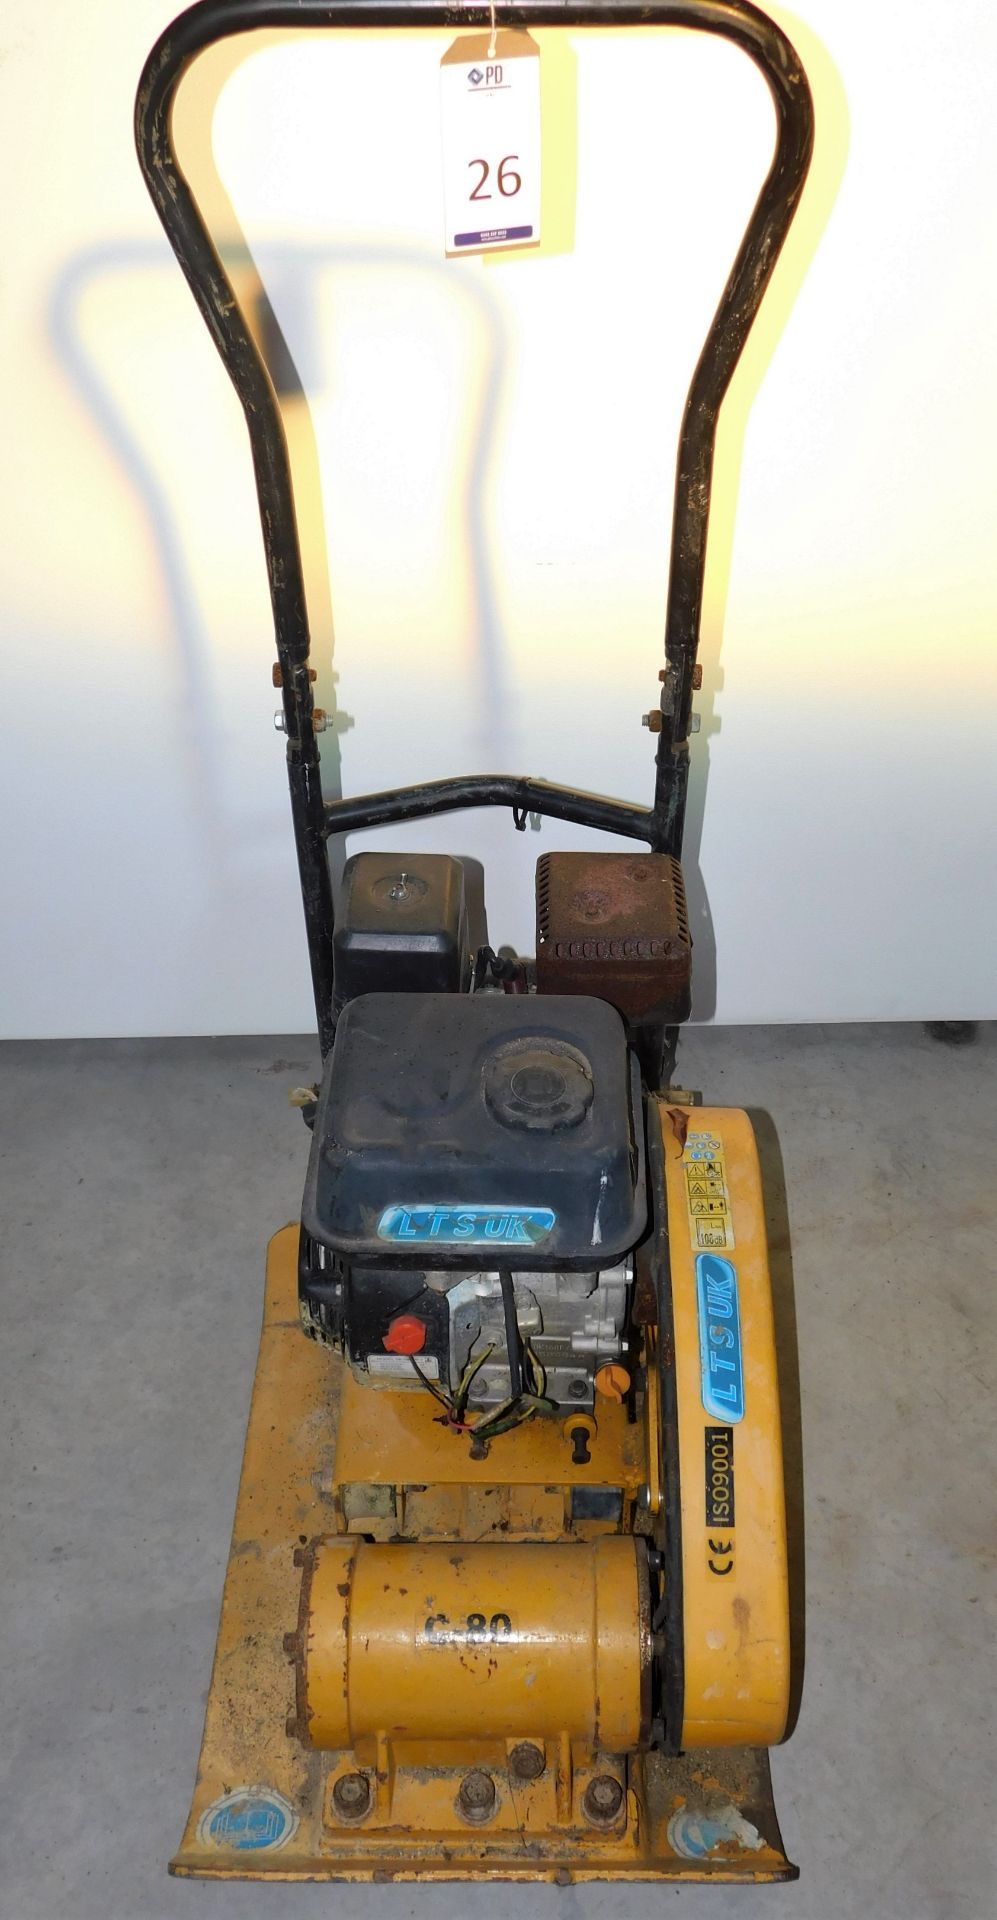 LTSUK C-80 Compactor Plate with LTSUK Engine Model DK168 (Location: Brentwood. Please Refer to